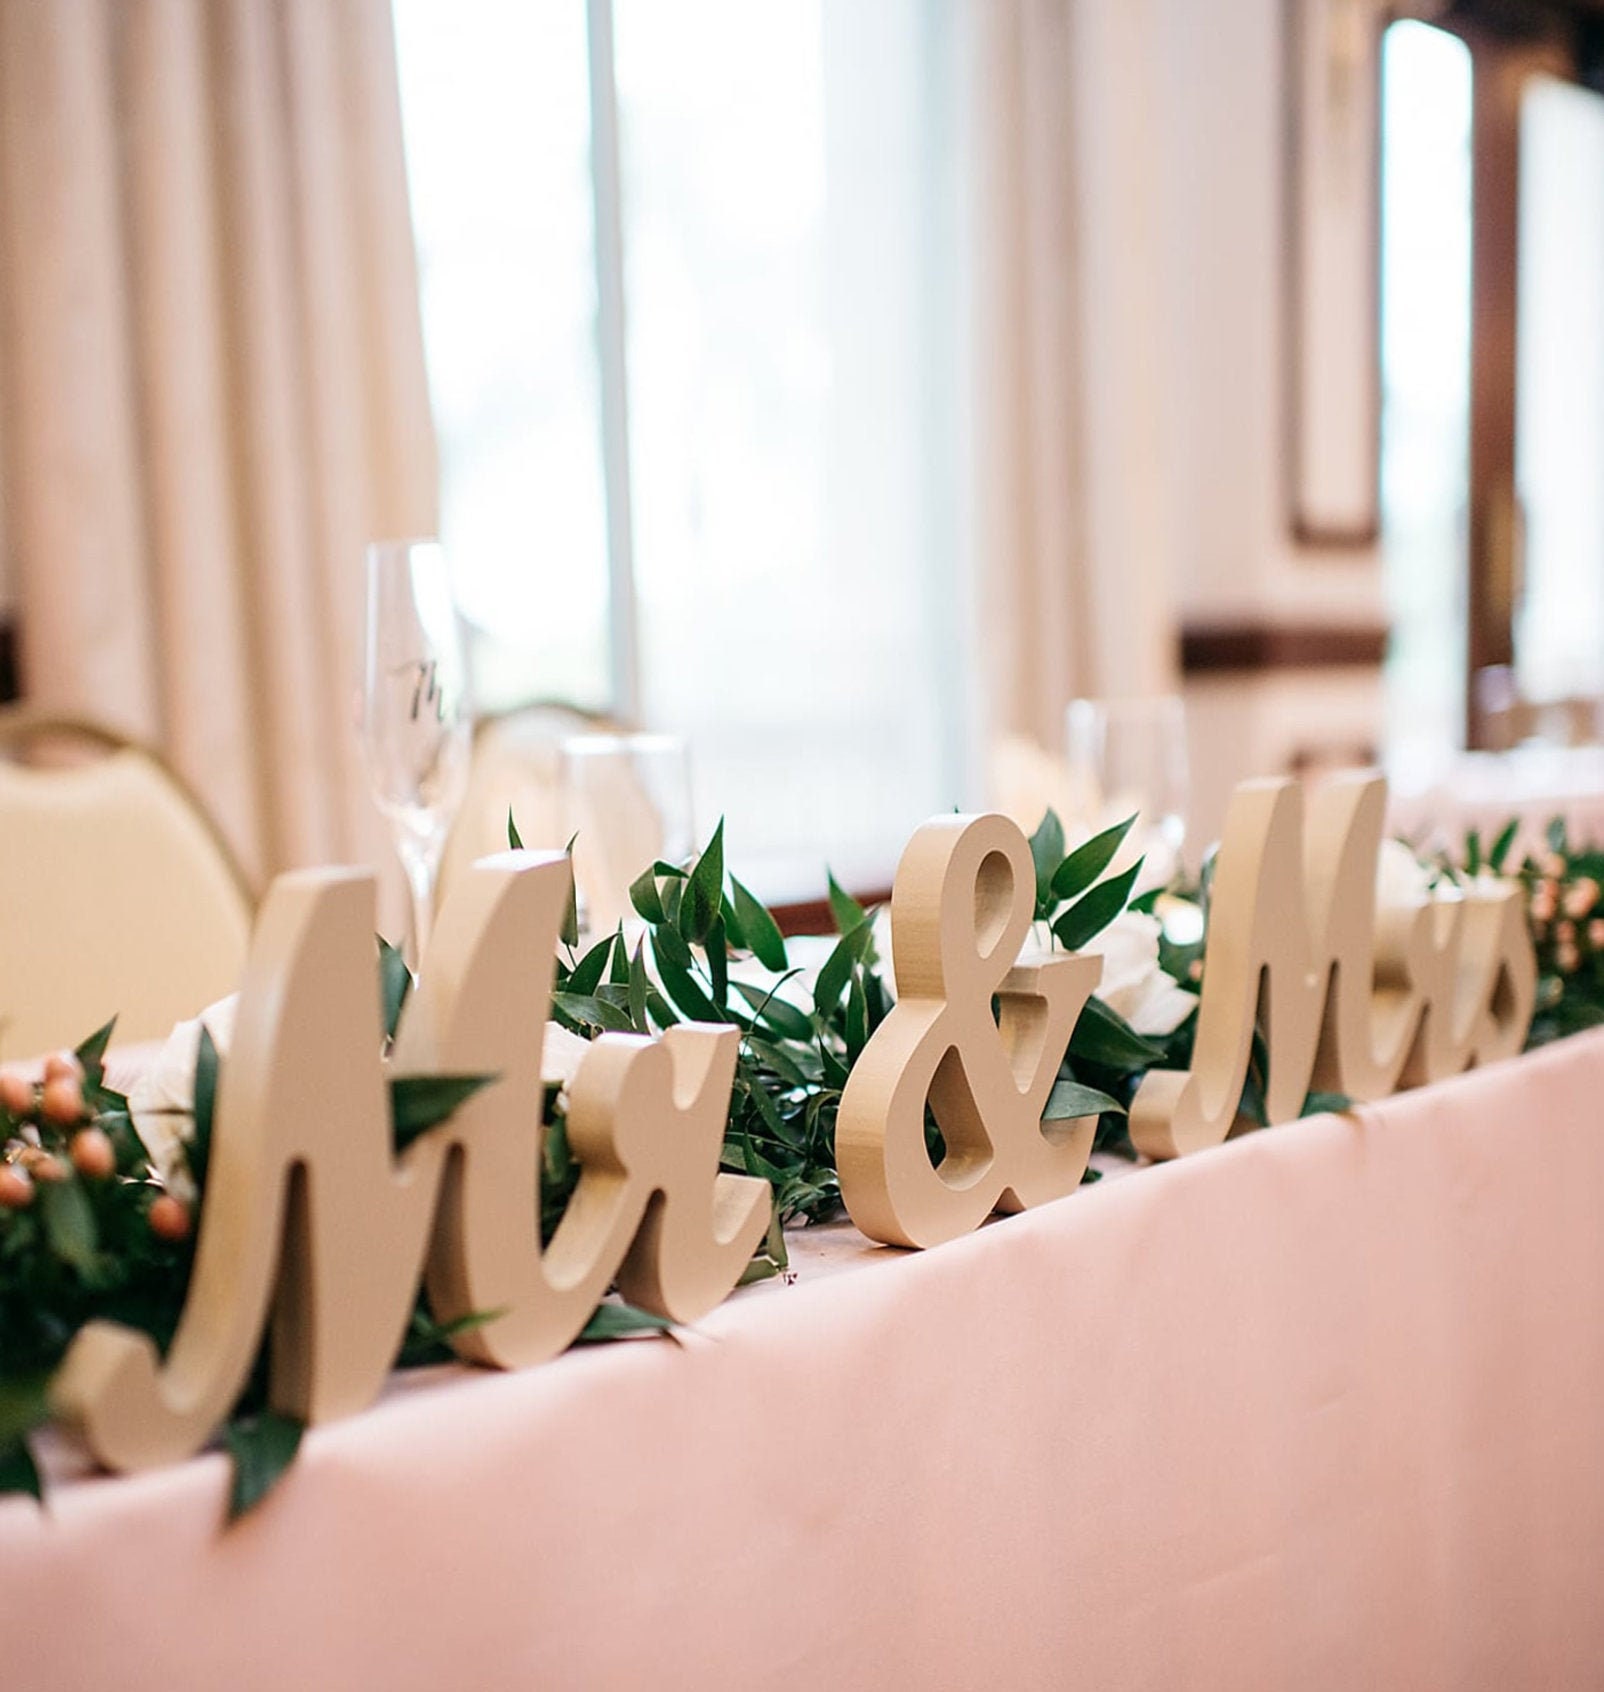 Mr & Mrs Personalised Wedding gift name letters sign decoration table top 